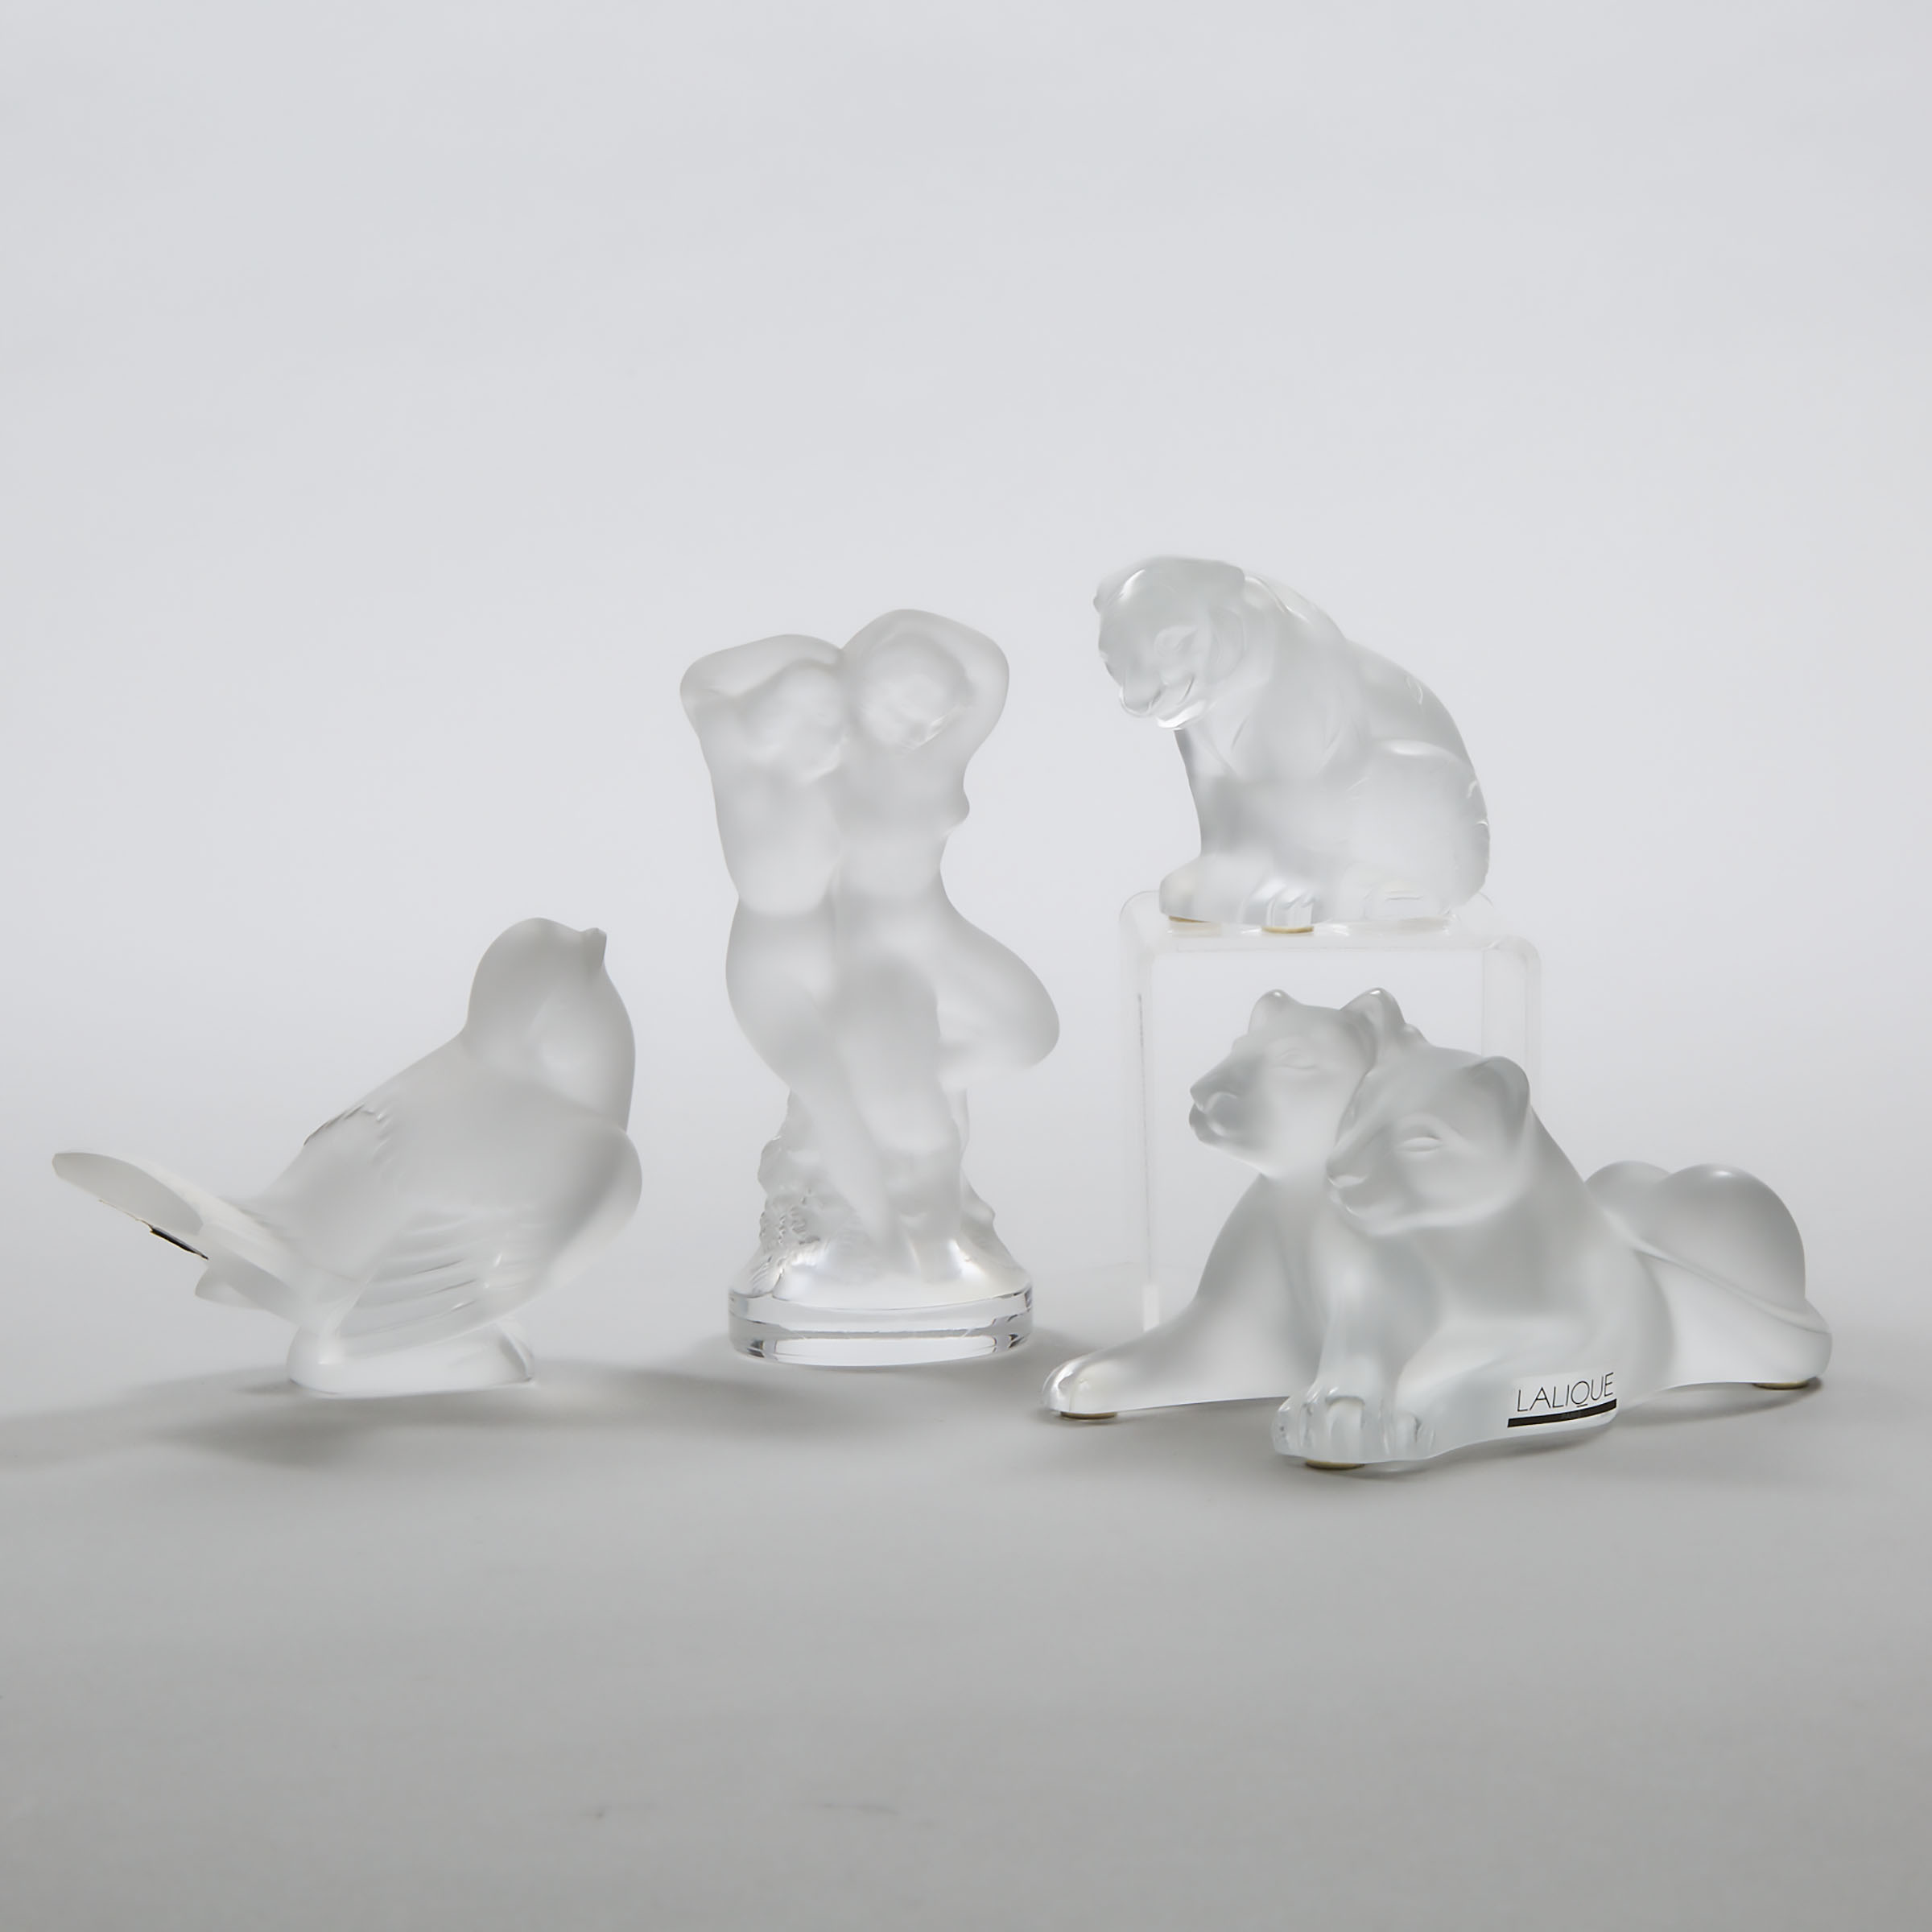 Four Lalique Moulded and Frosted Glass Figurines, post-1978